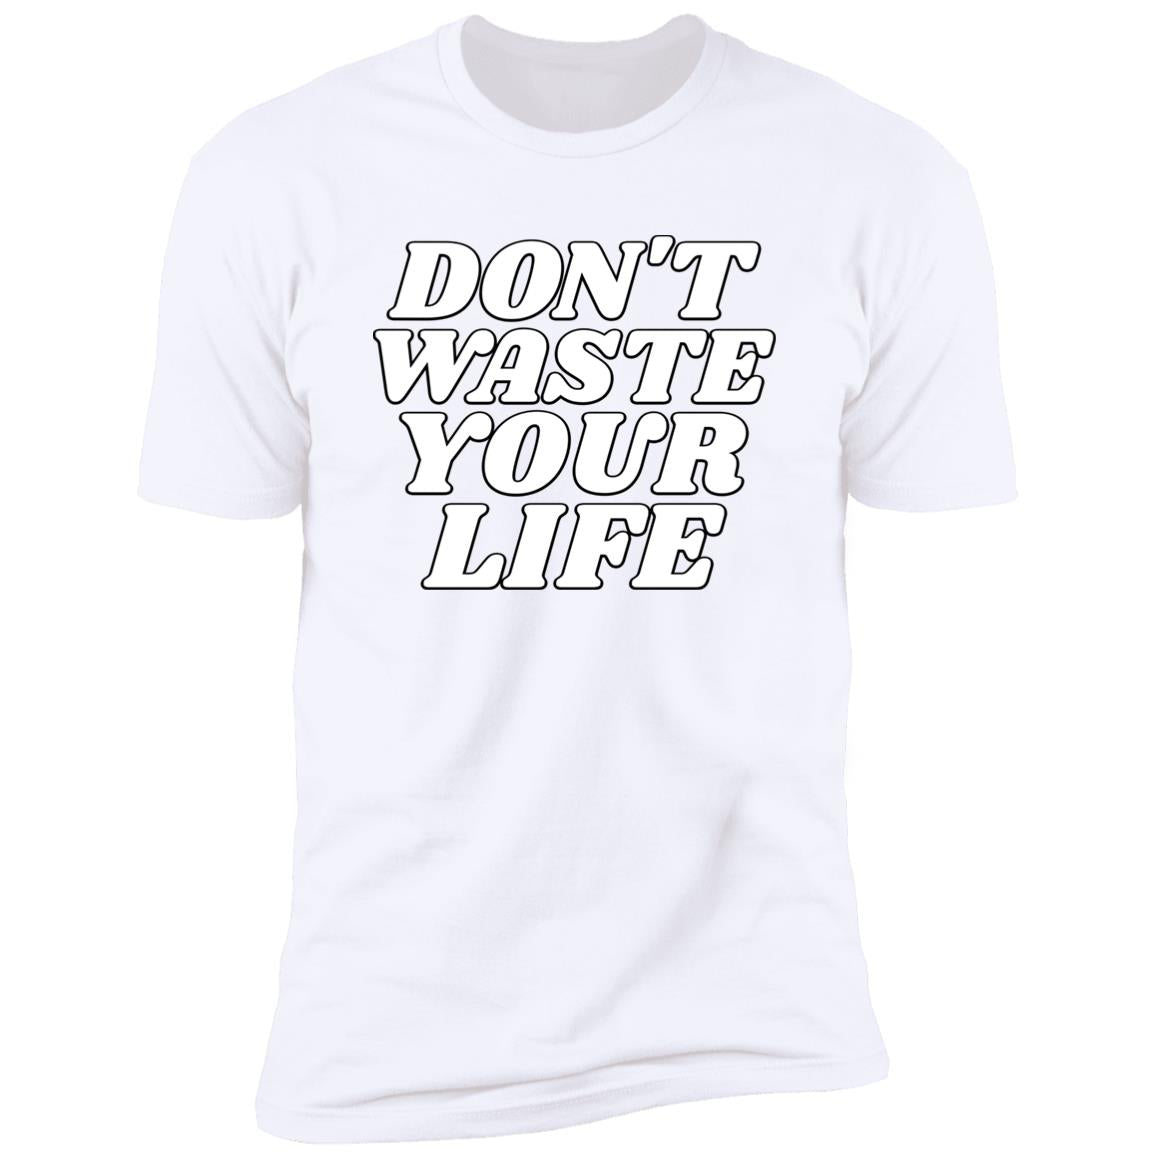 Don't Waste Your Life (Unisex Tee)